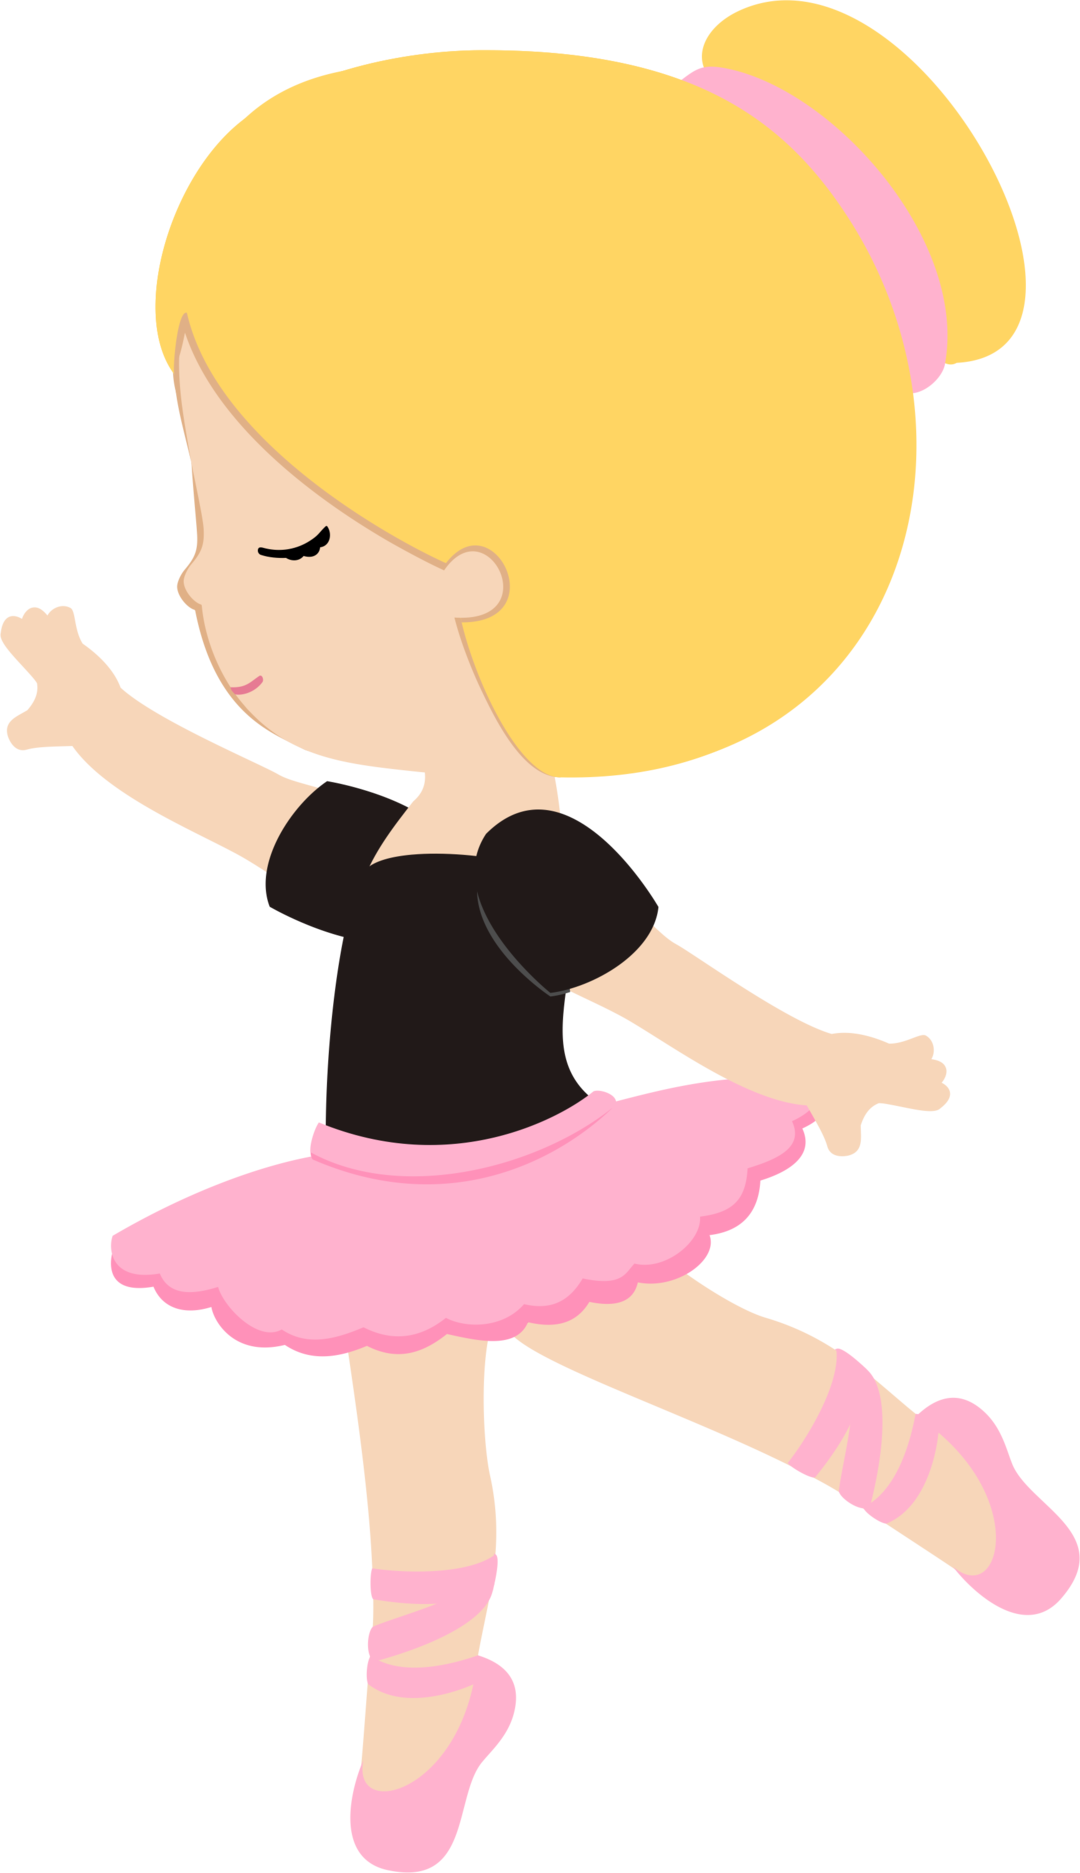 Clipart Of Ballet Dancers At Getdrawings Free Download